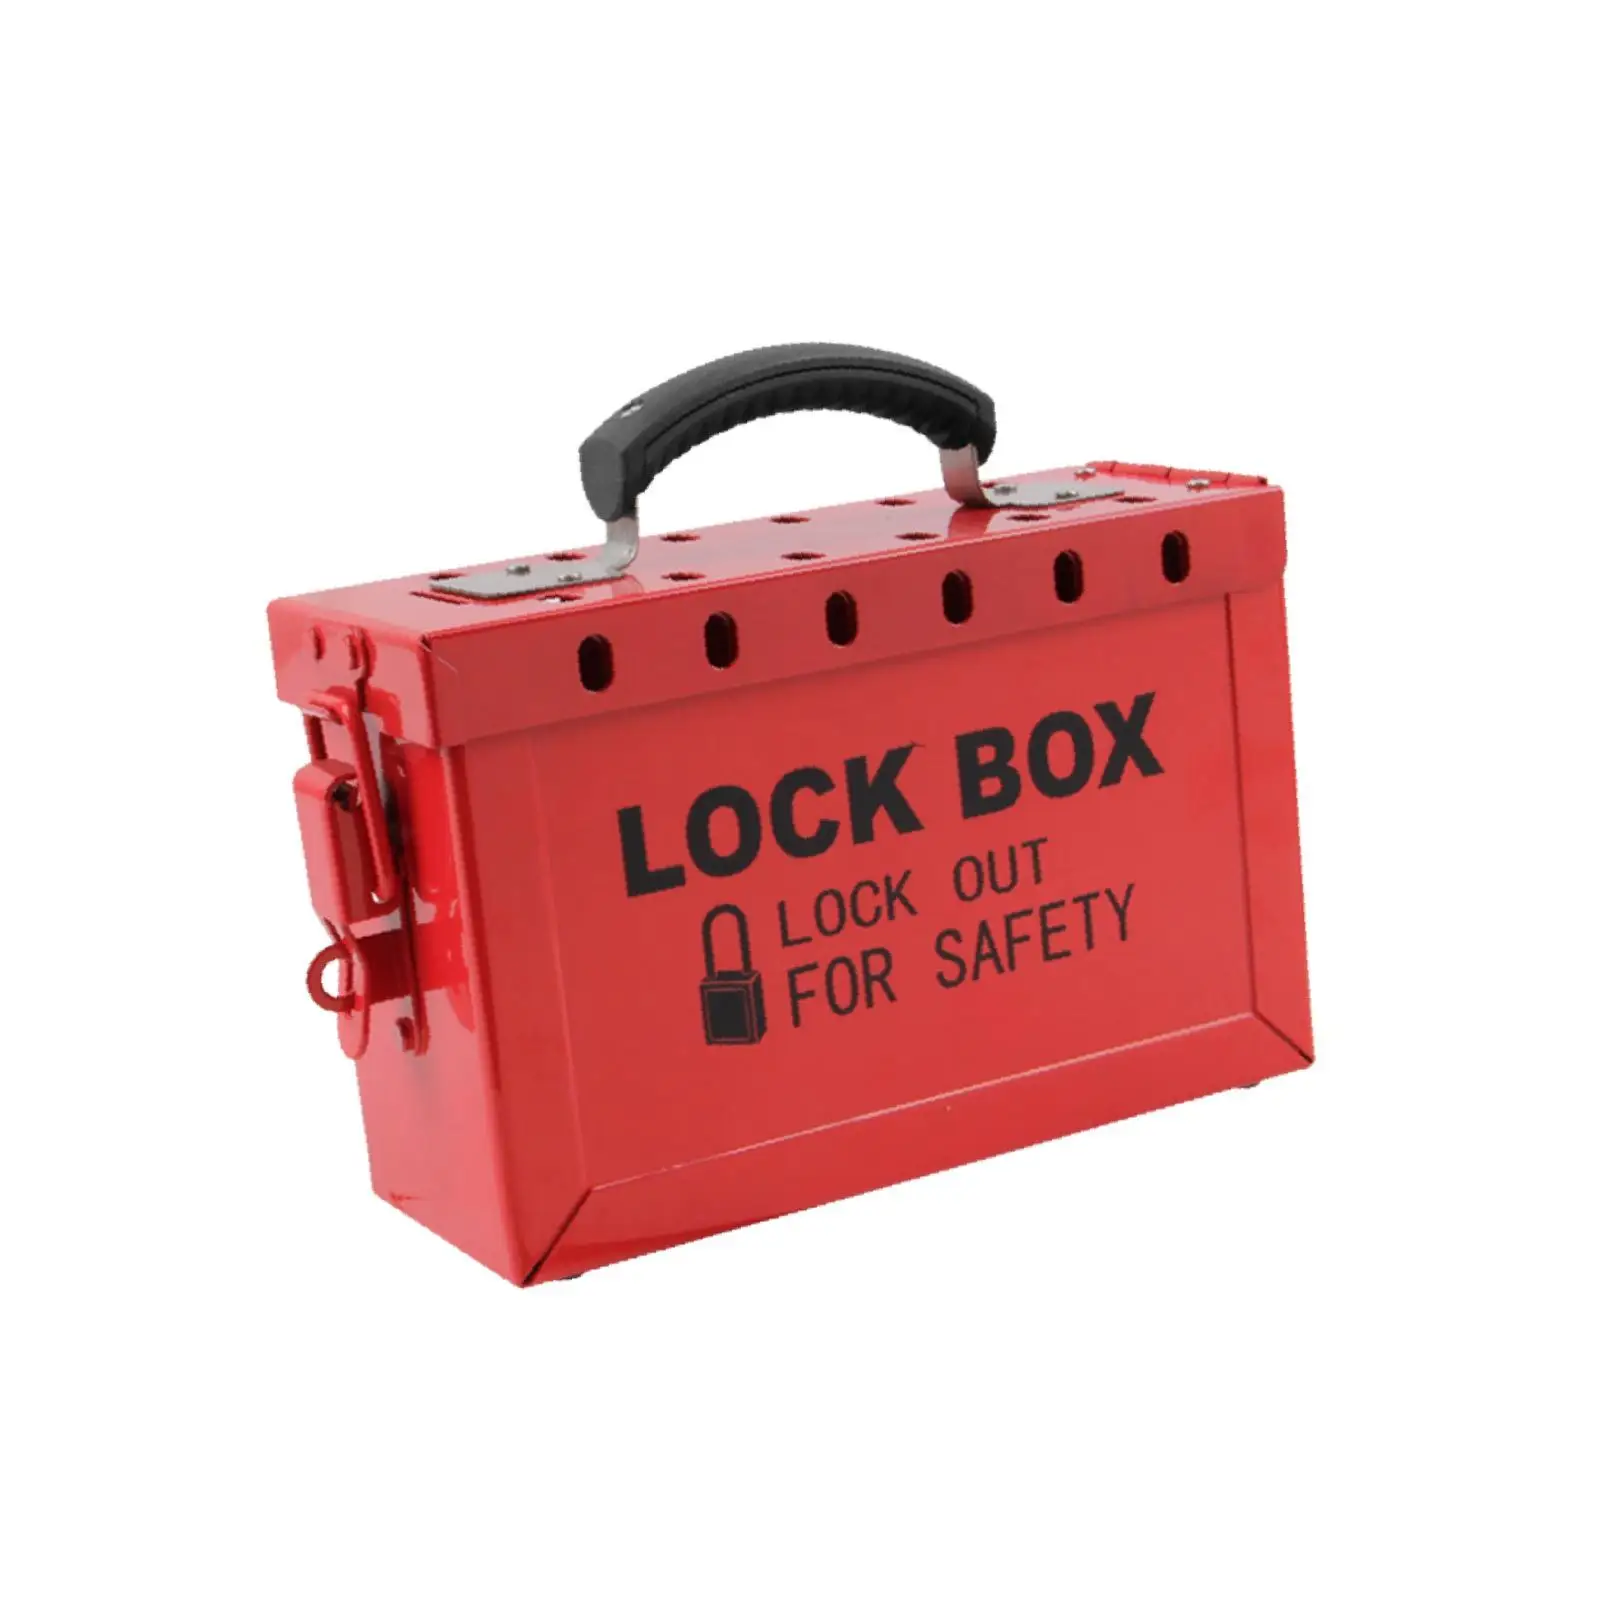 Lock Box Efficiency Lightweight Convenient Red Lockout Tagout Box Lockout Box Padlock Box for Car Factory Device Management